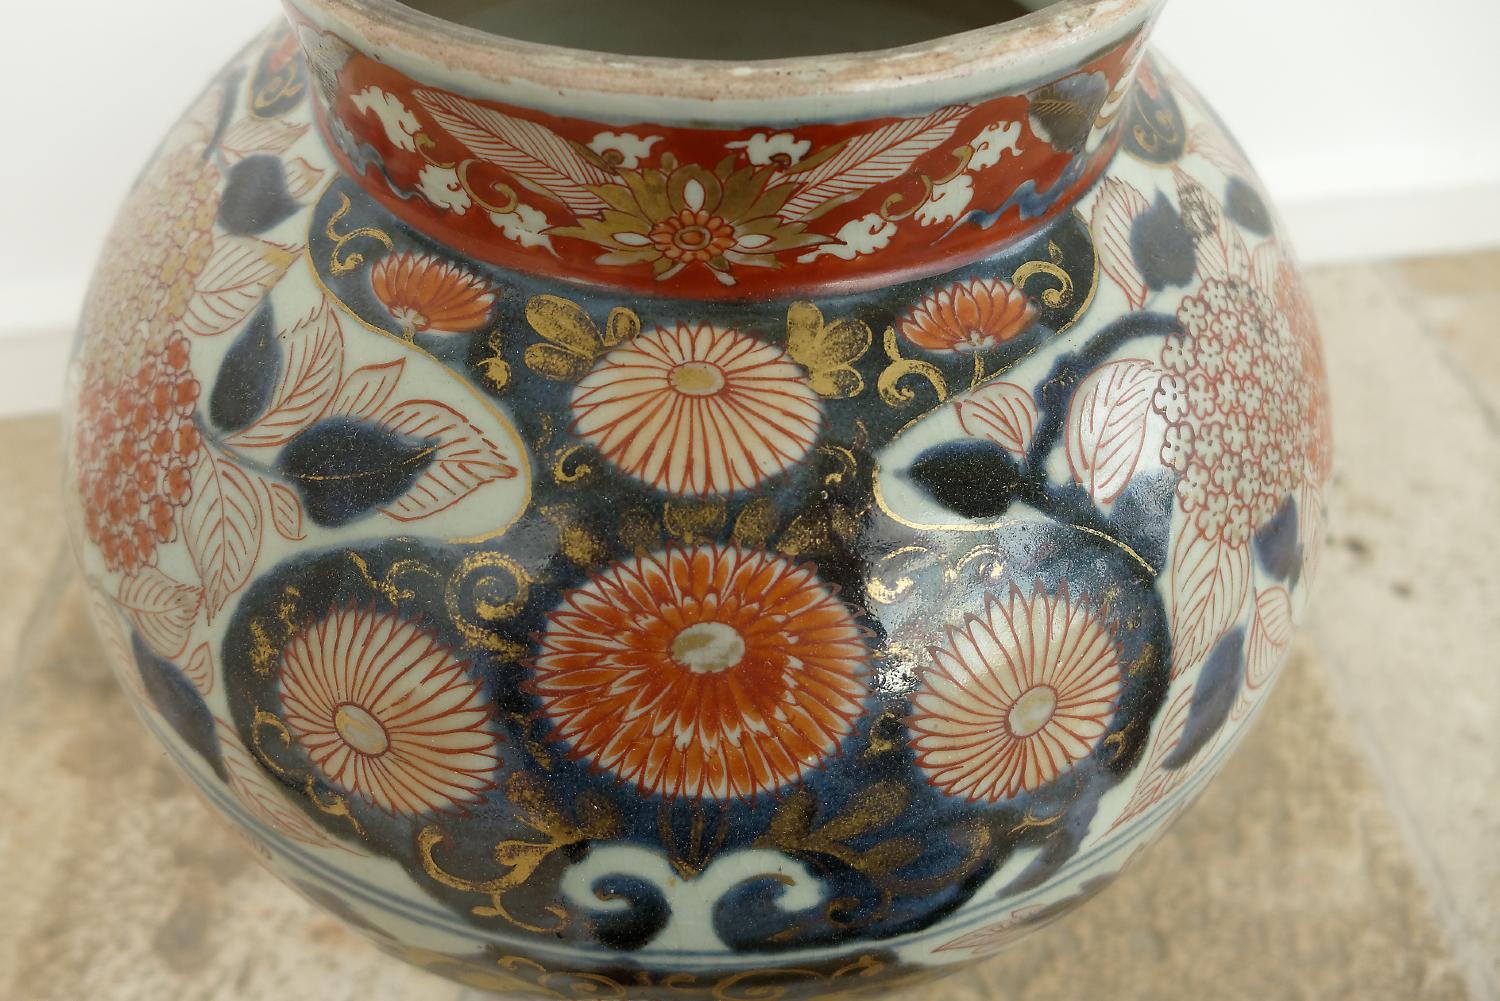 A Japanese Edo Period (late 17th century) Imari vase and cover, porcelain painted in the Imari palette of underglaze blue with overglaze iron-red and details in gold, decoration with irises, peonies and chrysanthemums, the finial in a form of